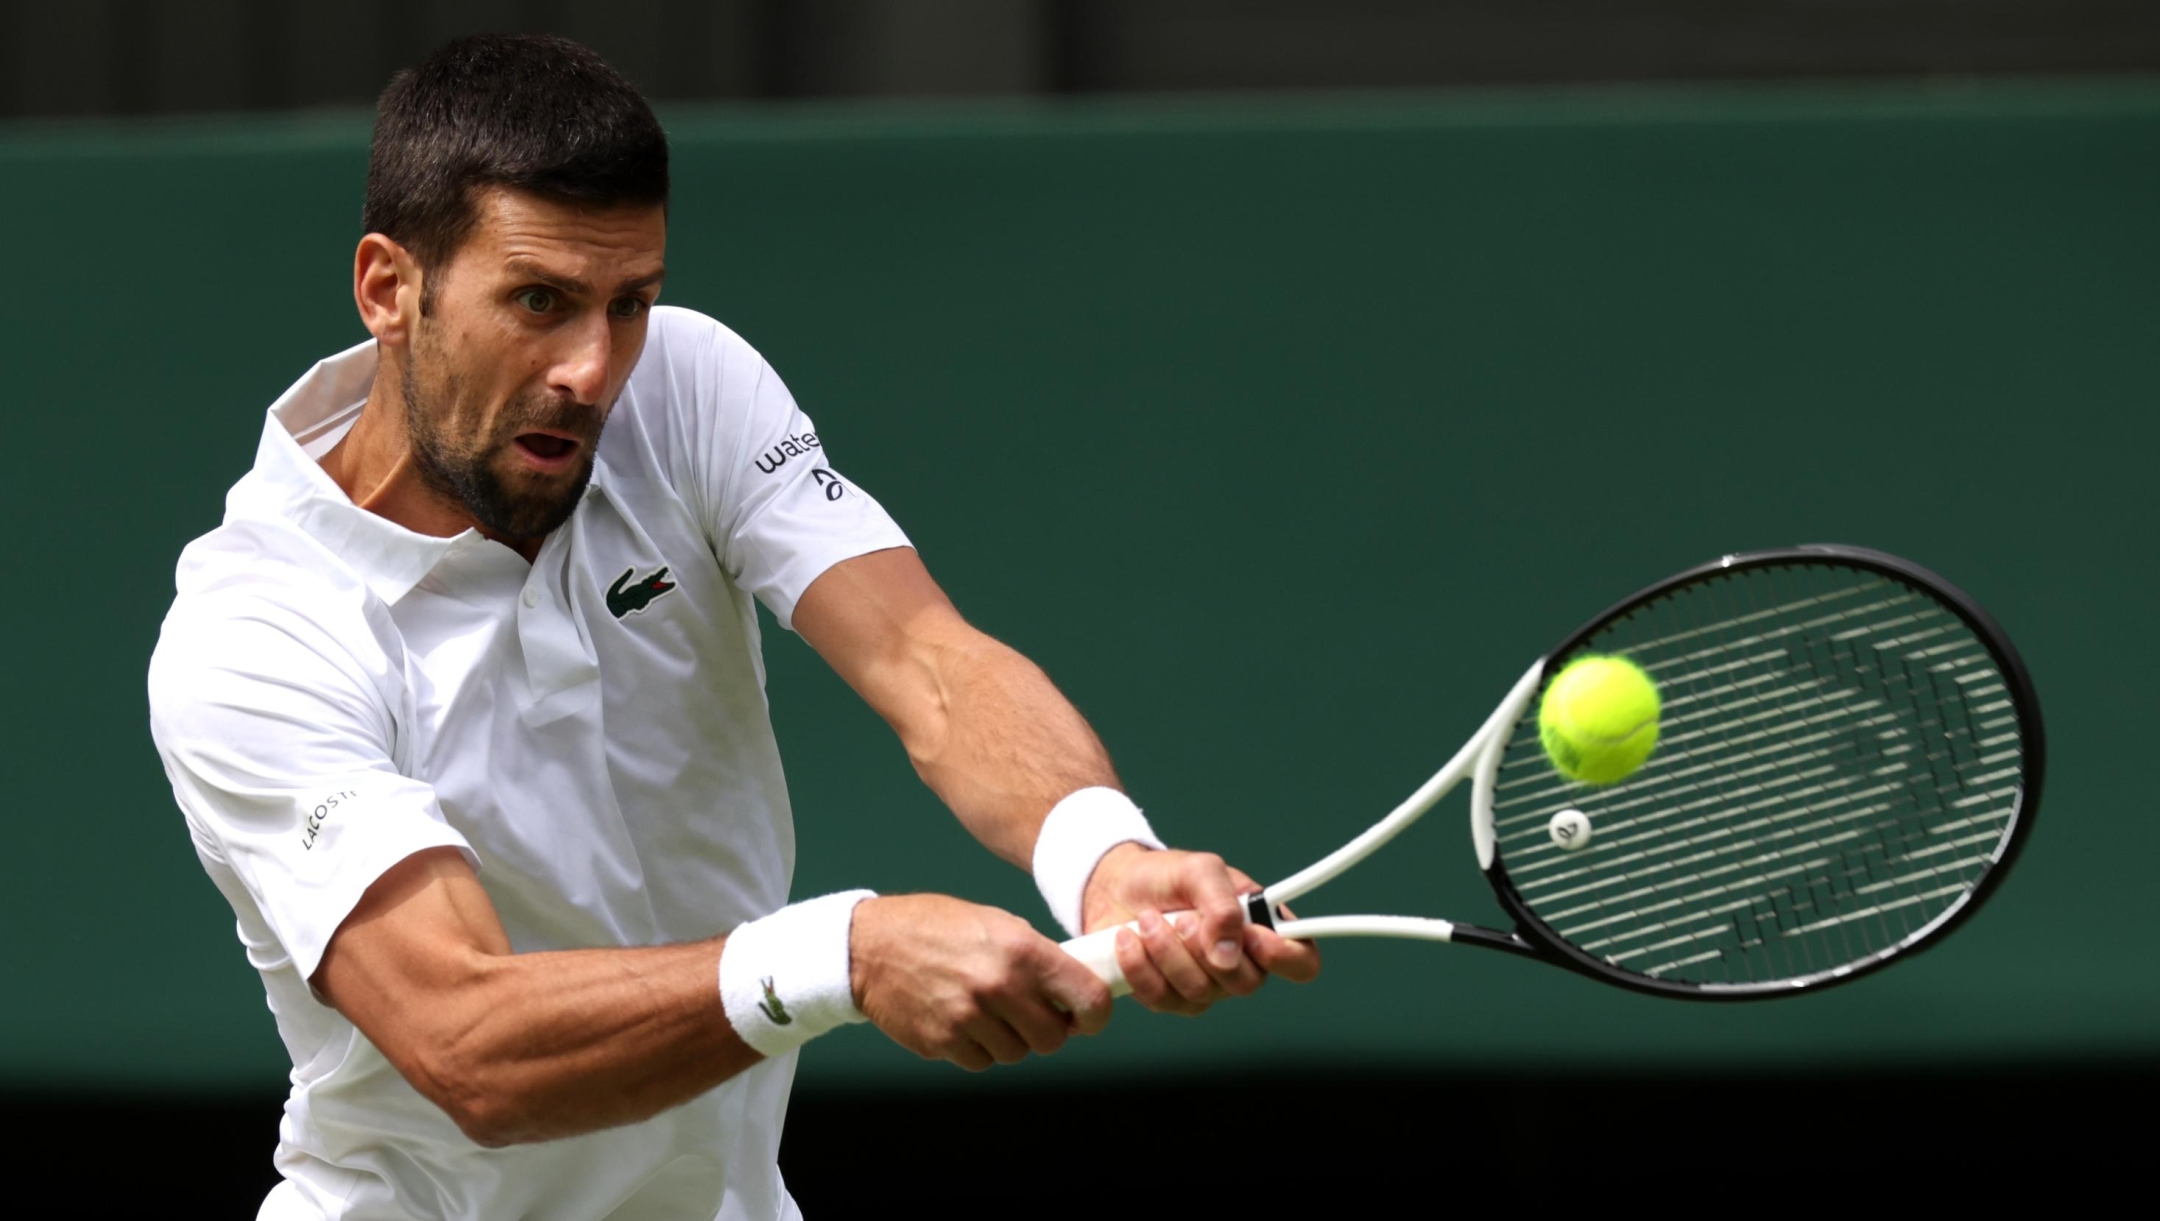 LONDON, ENGLAND - JULY 16: Novak Djokovic of Serbia plays a backhand in the Men's Singles Final against Carlos Alcaraz of Spain on day fourteen of The Championships Wimbledon 2023 at All England Lawn Tennis and Croquet Club on July 16, 2023 in London, England. (Photo by Clive Brunskill/Getty Images)